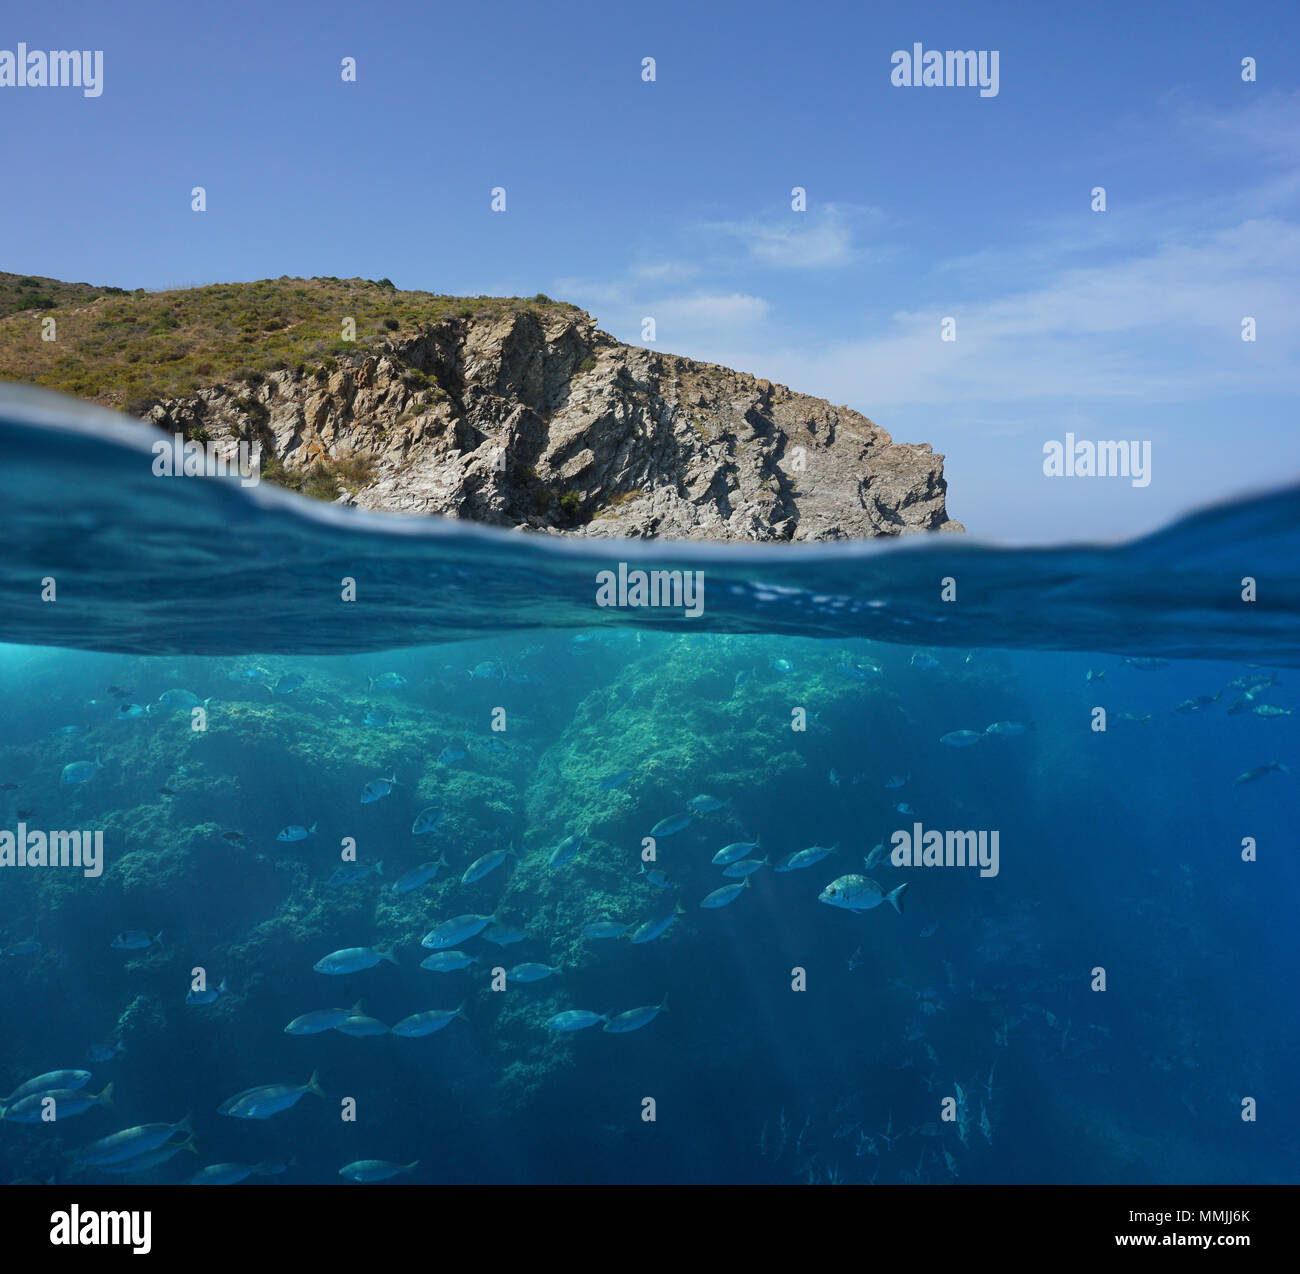 Mediterranean sea rocky coast split view above and below water surface with a shoal of fish underwater, Marine reserve of Cerbere Banyuls, France Stock Photo